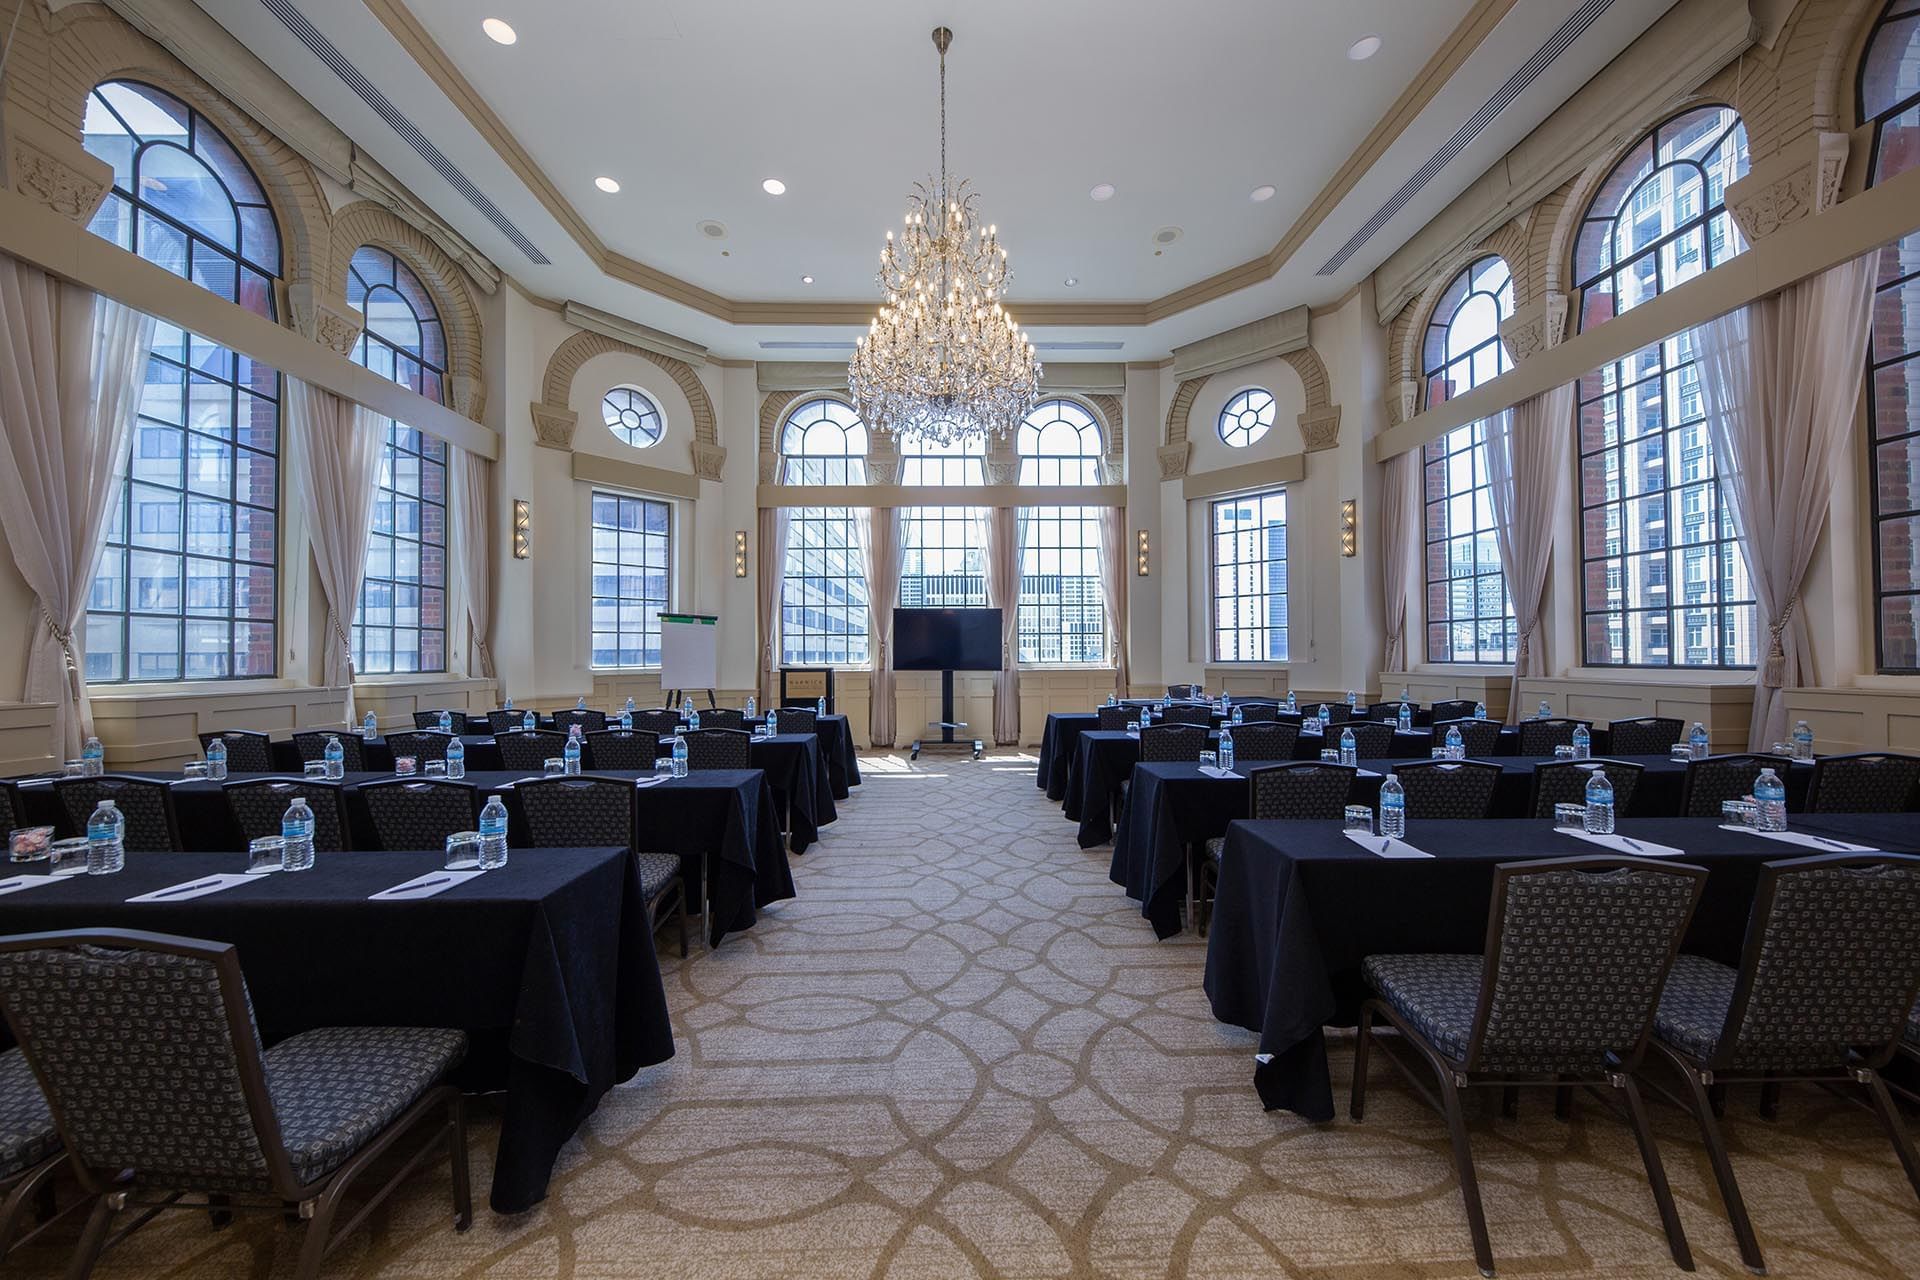 Classroom-style seating in a Ballroom at Warwick Allerton